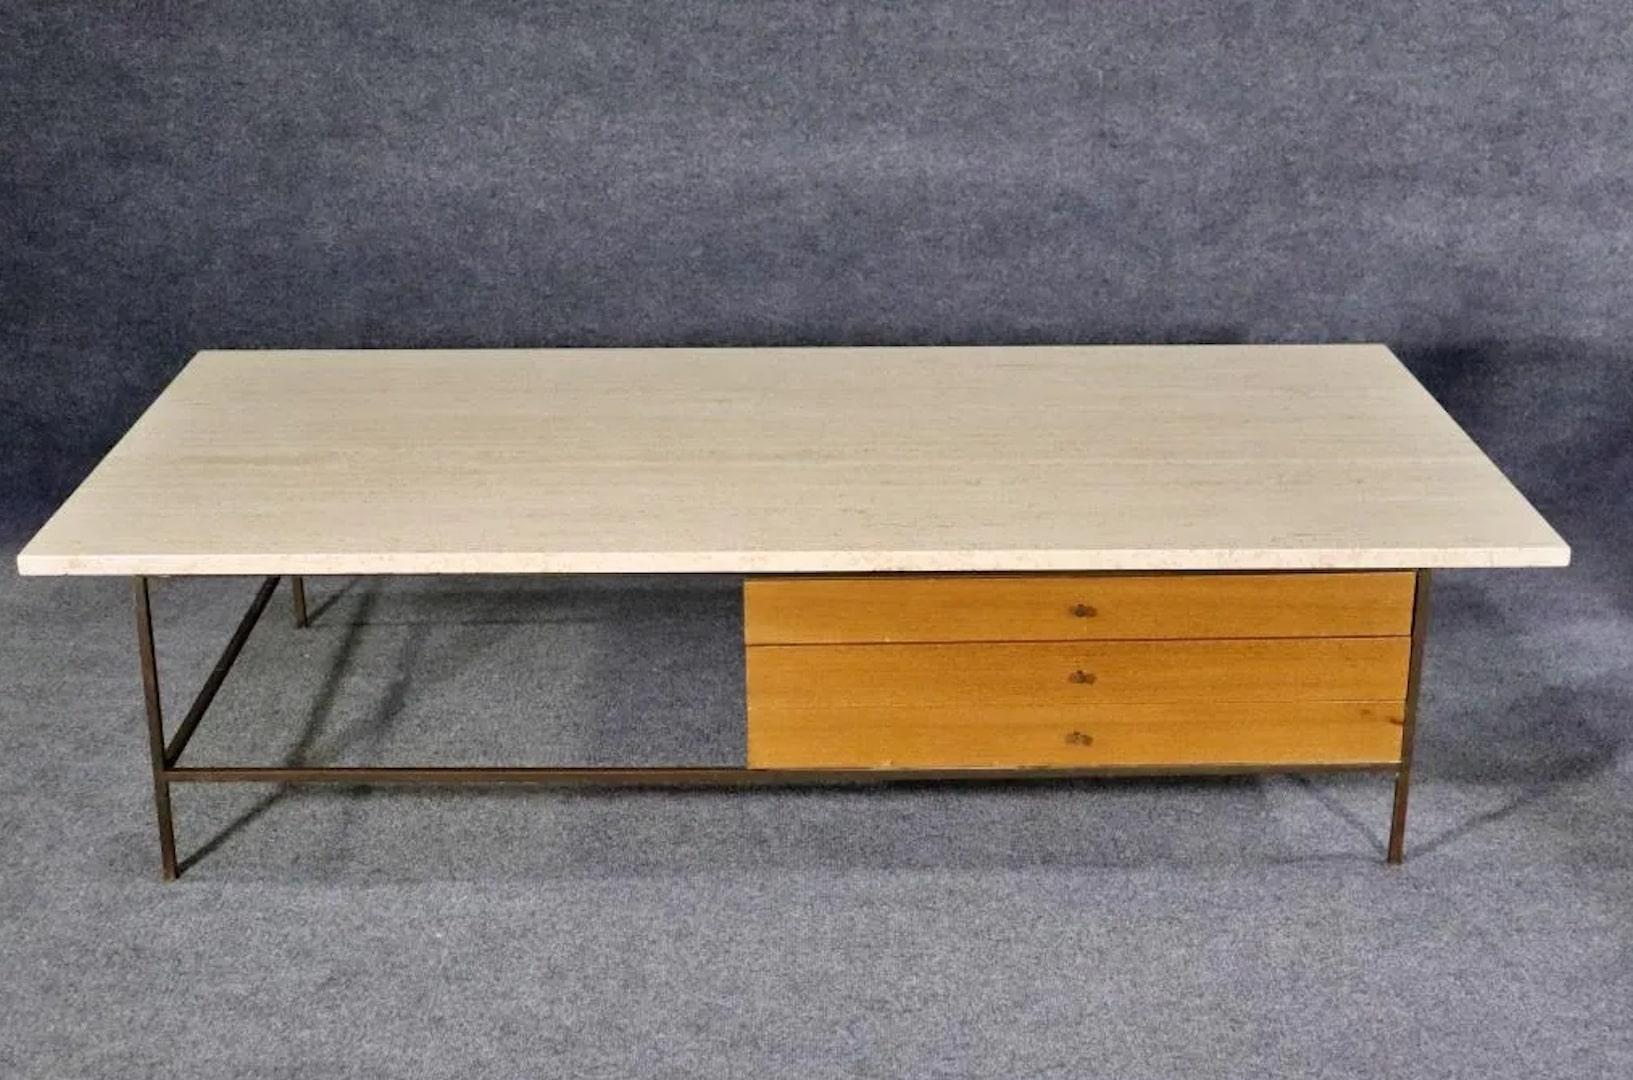 Large coffee table designed by Paul McCobb for his Irwin Collection. Heavy travertine top set on a brass frame with drawers.
Please confirm location.